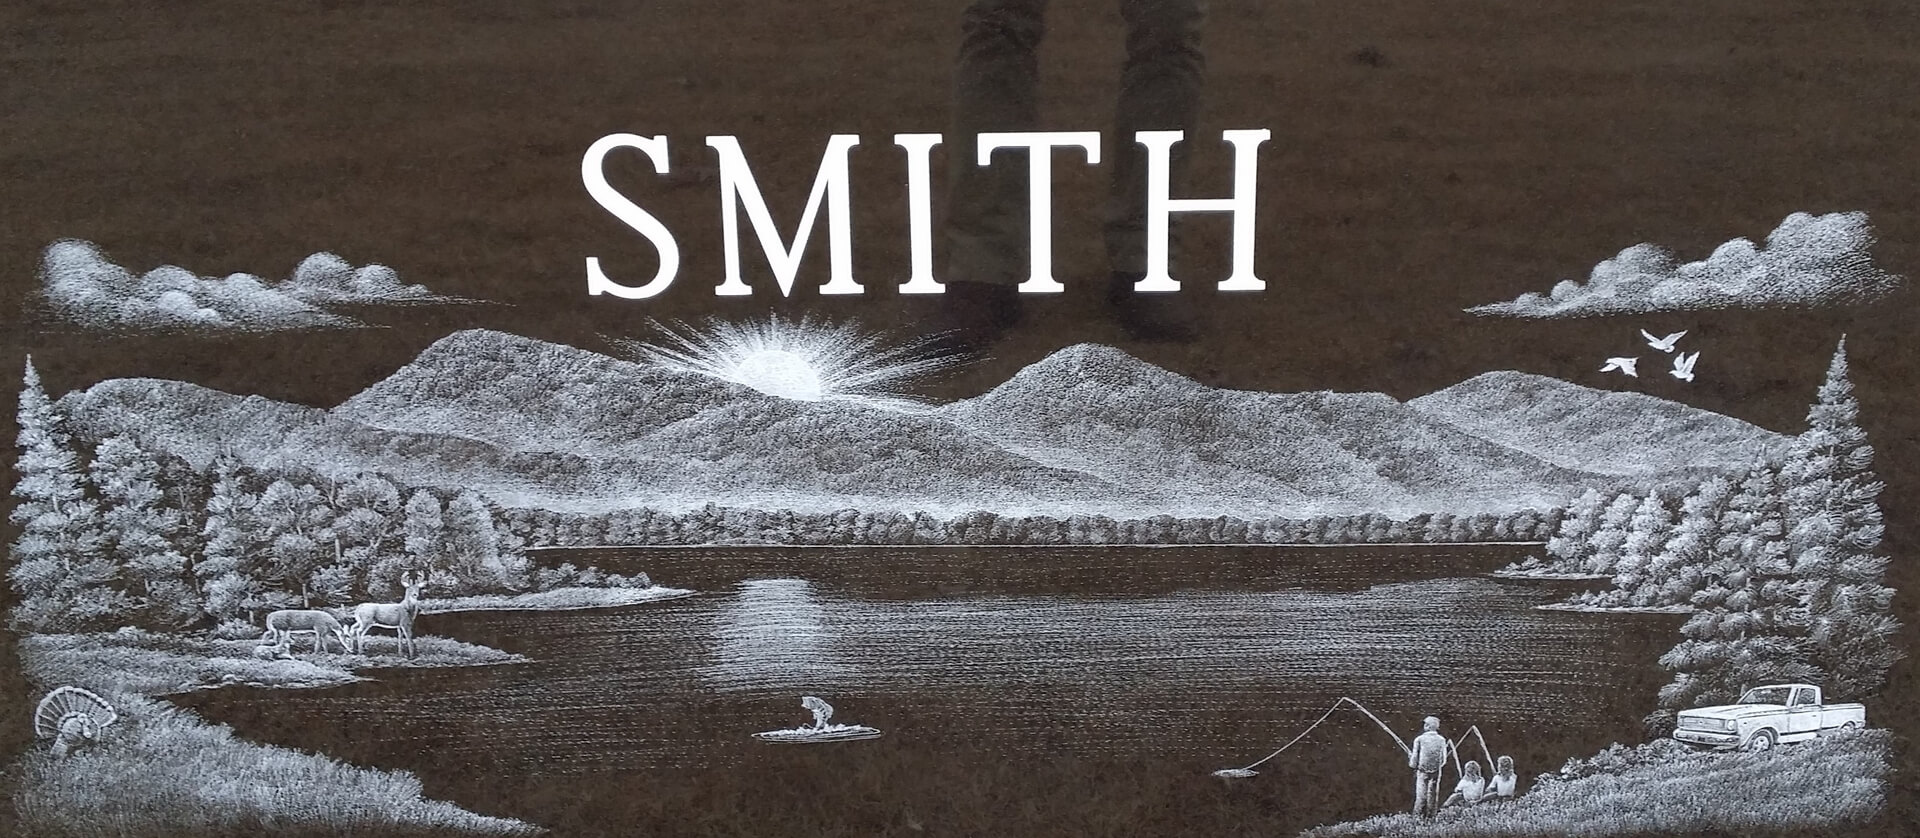 A beautiful piece of artwork with mountains and a name Smith